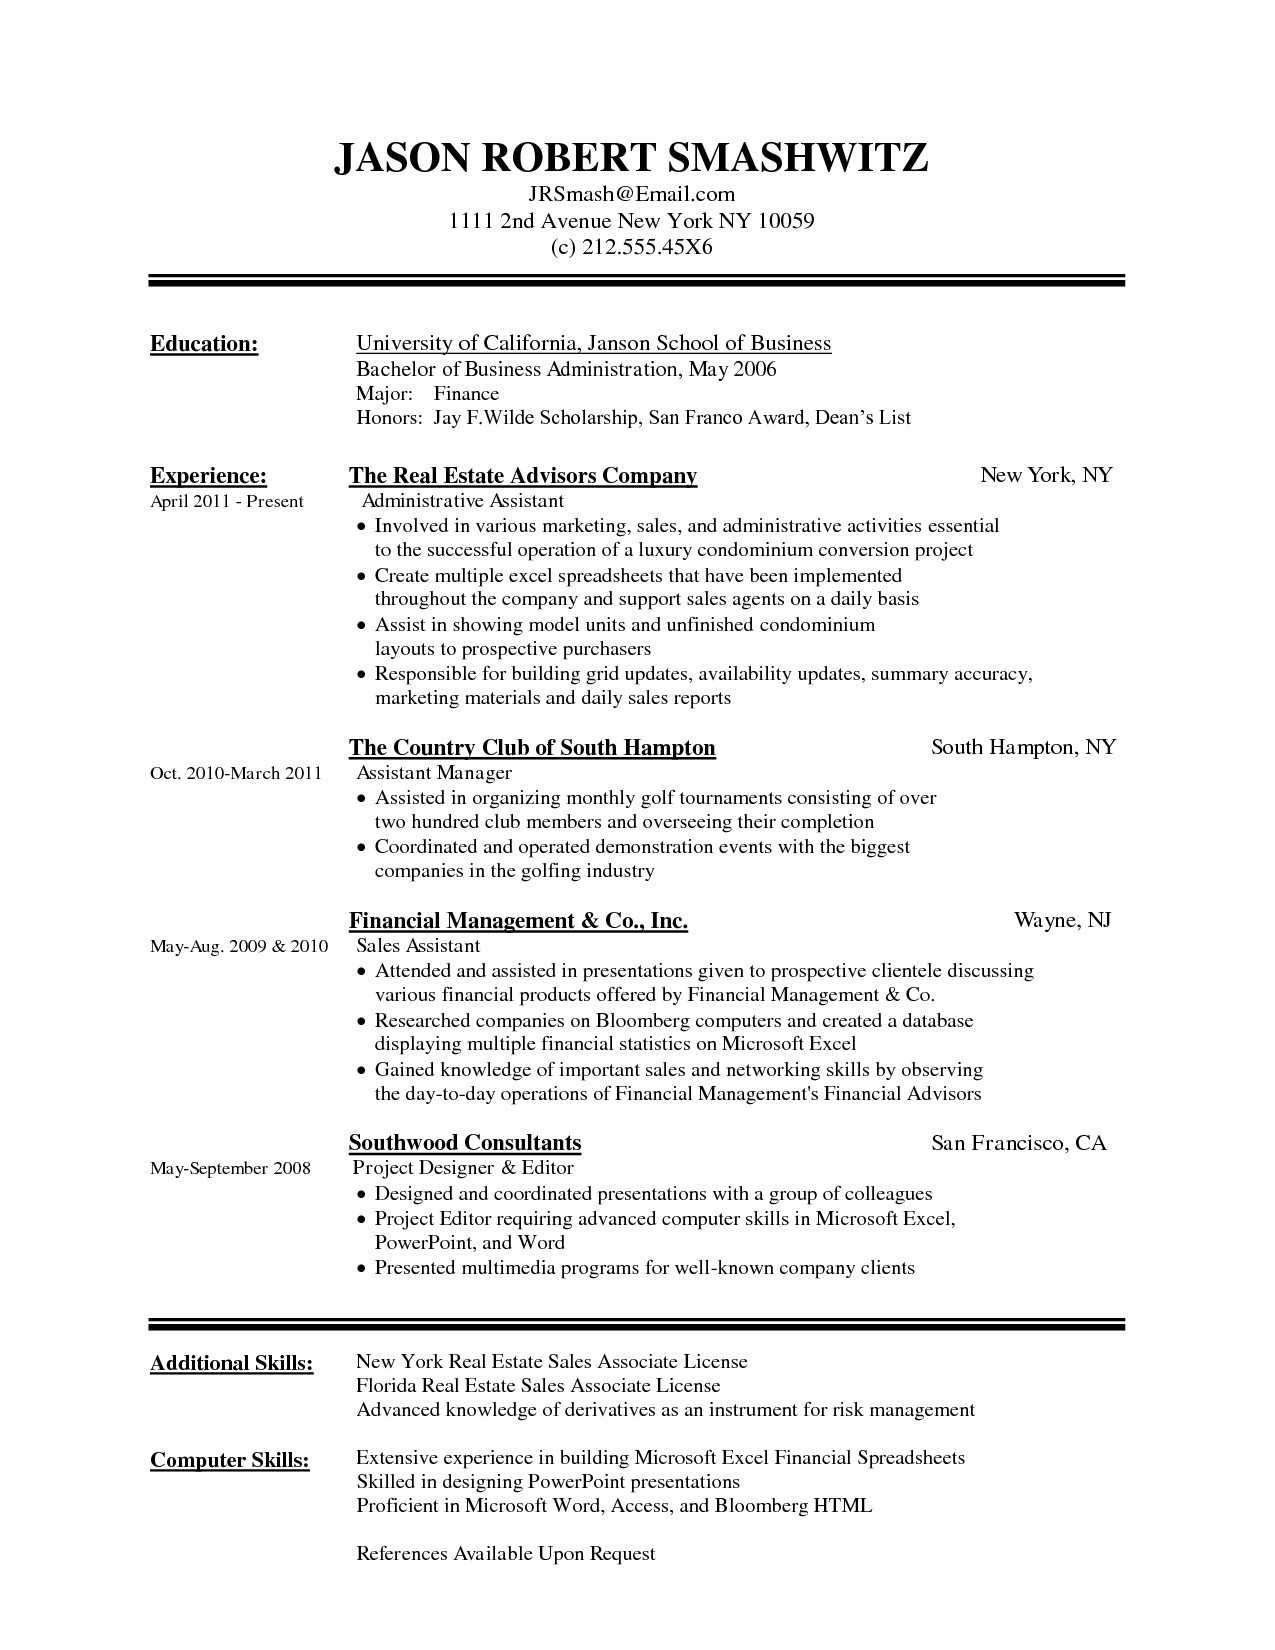 Awesome Resume Templates For Word 2010 - Superkepo In Resume Templates Word 2010